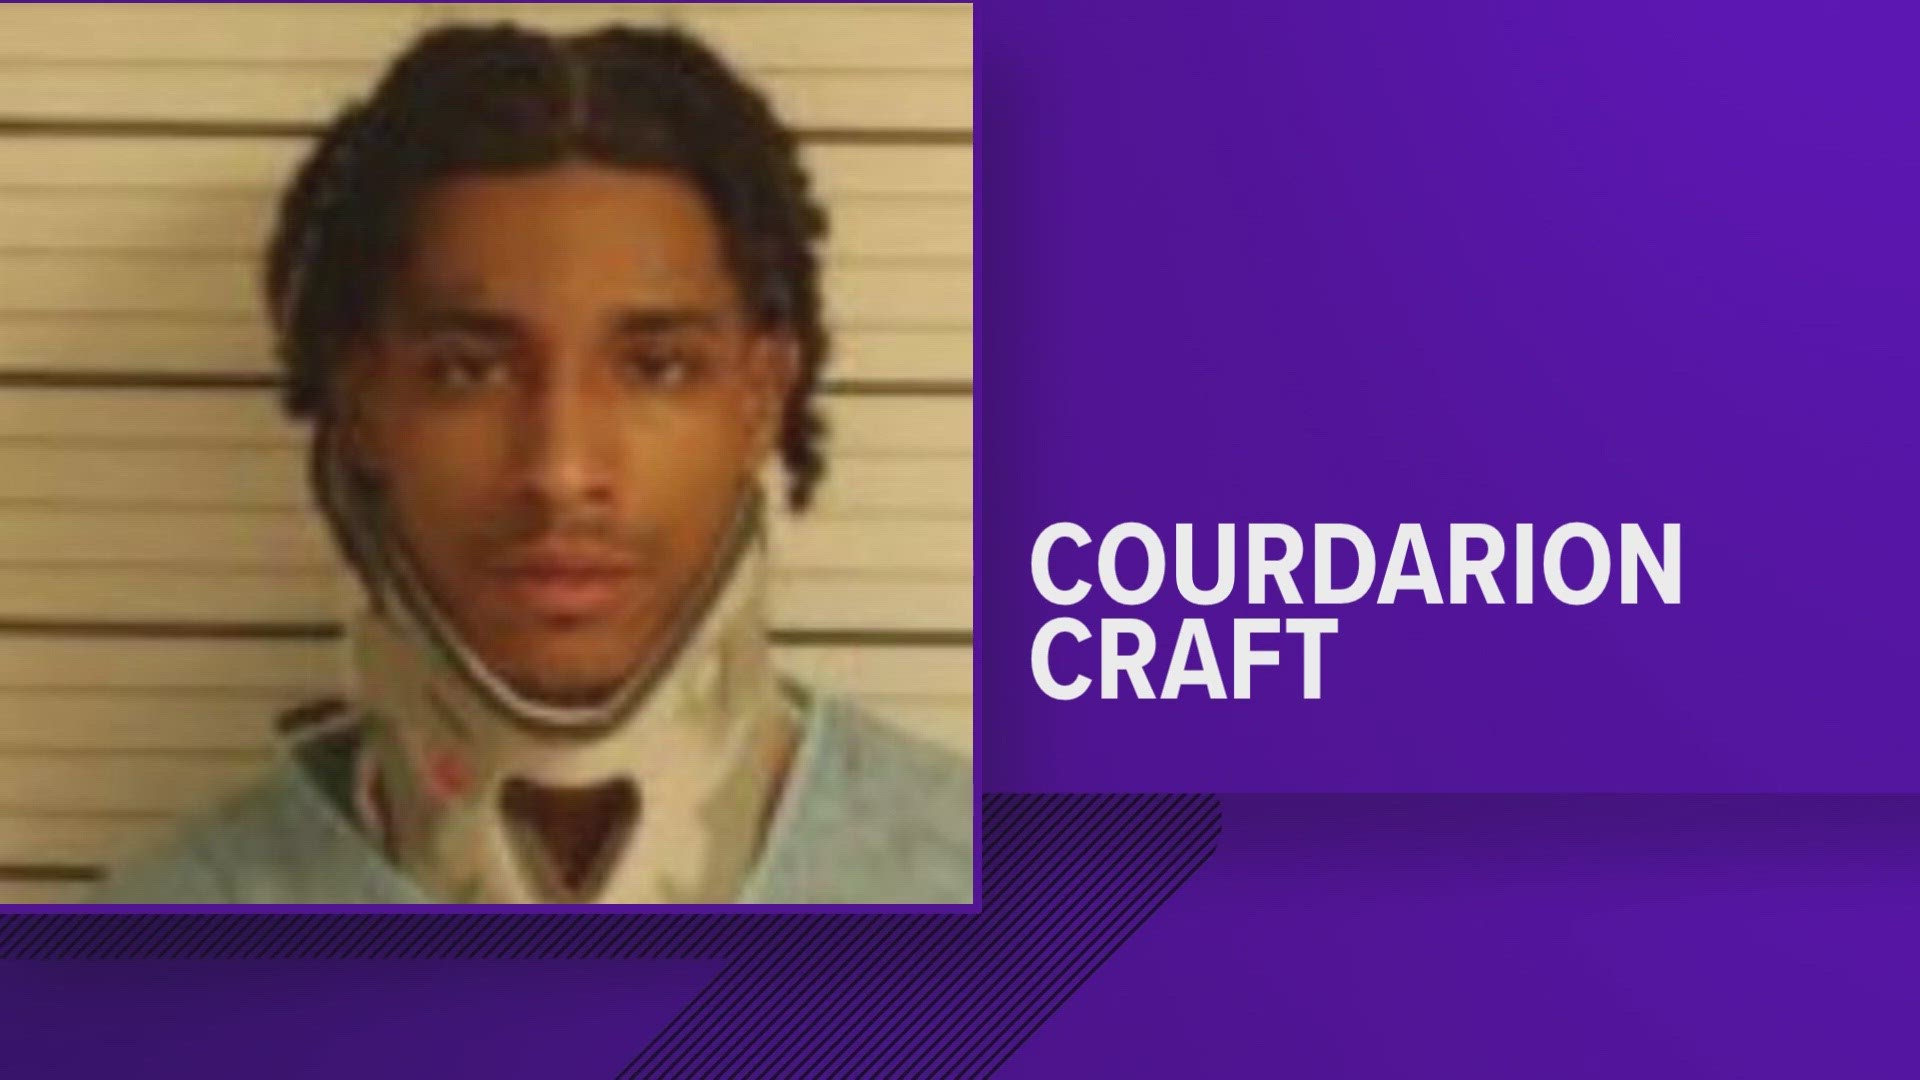 The suspect of a citywide manhunt has been identified and charged, according to Memphis Police Department (MPD).